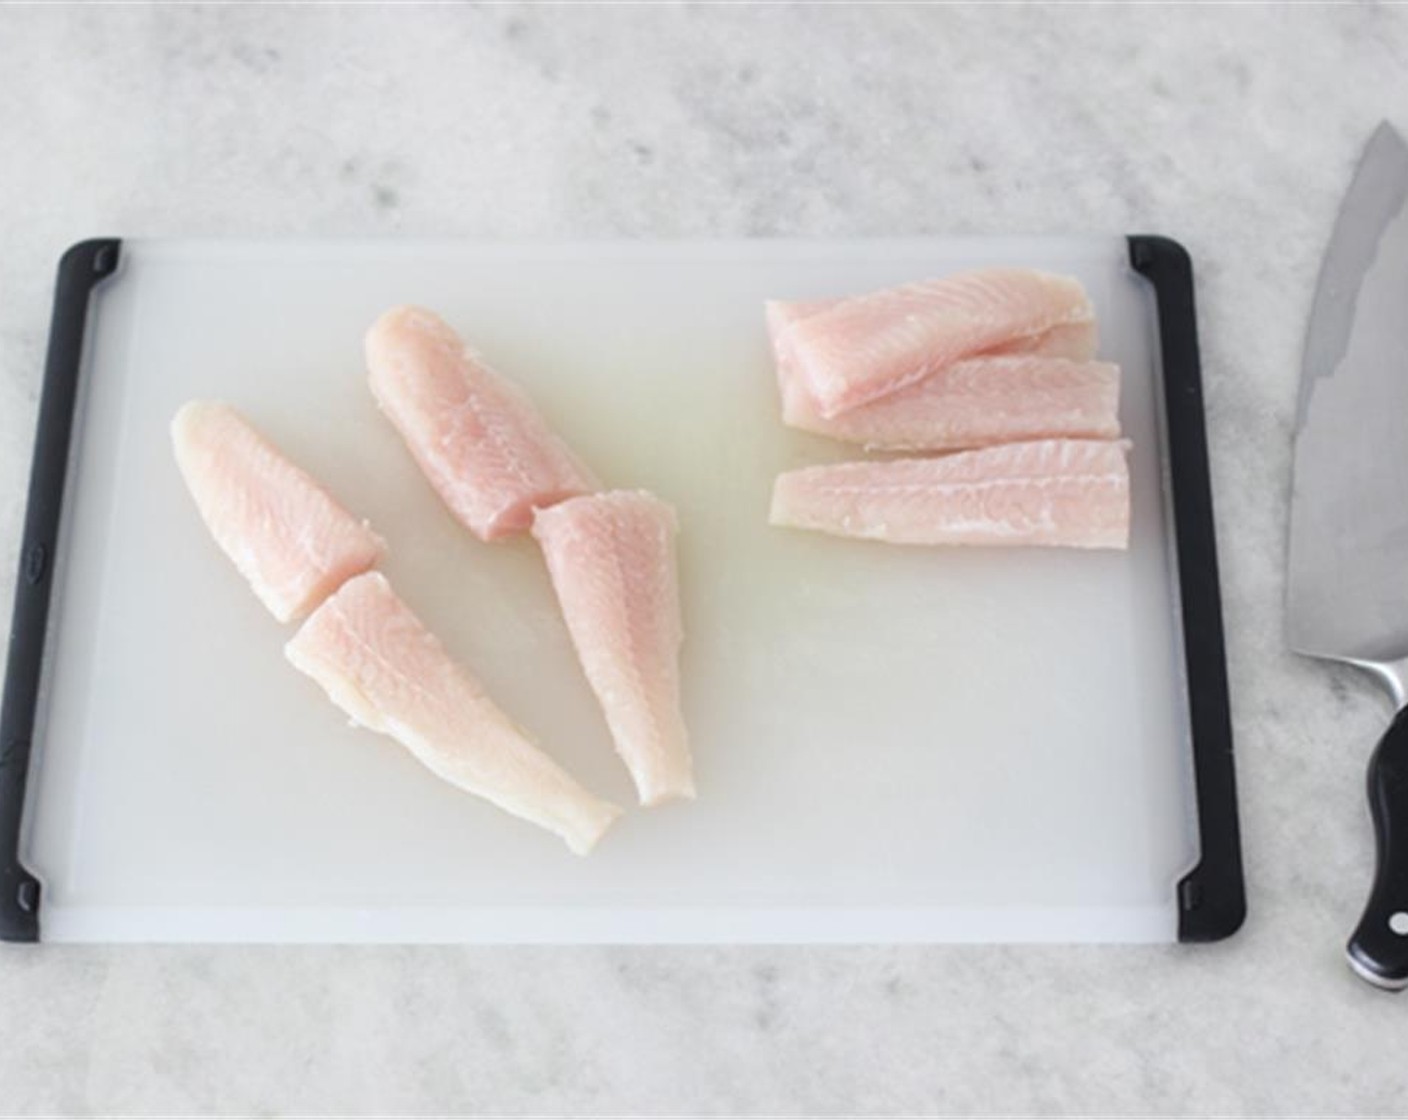 step 2 Cut the Cod Fillets (1.5 lb) into 1-11/2 inch thick strips. Season the fish on both sides with Salt (to taste) and Freshly Ground Black Pepper (to taste).